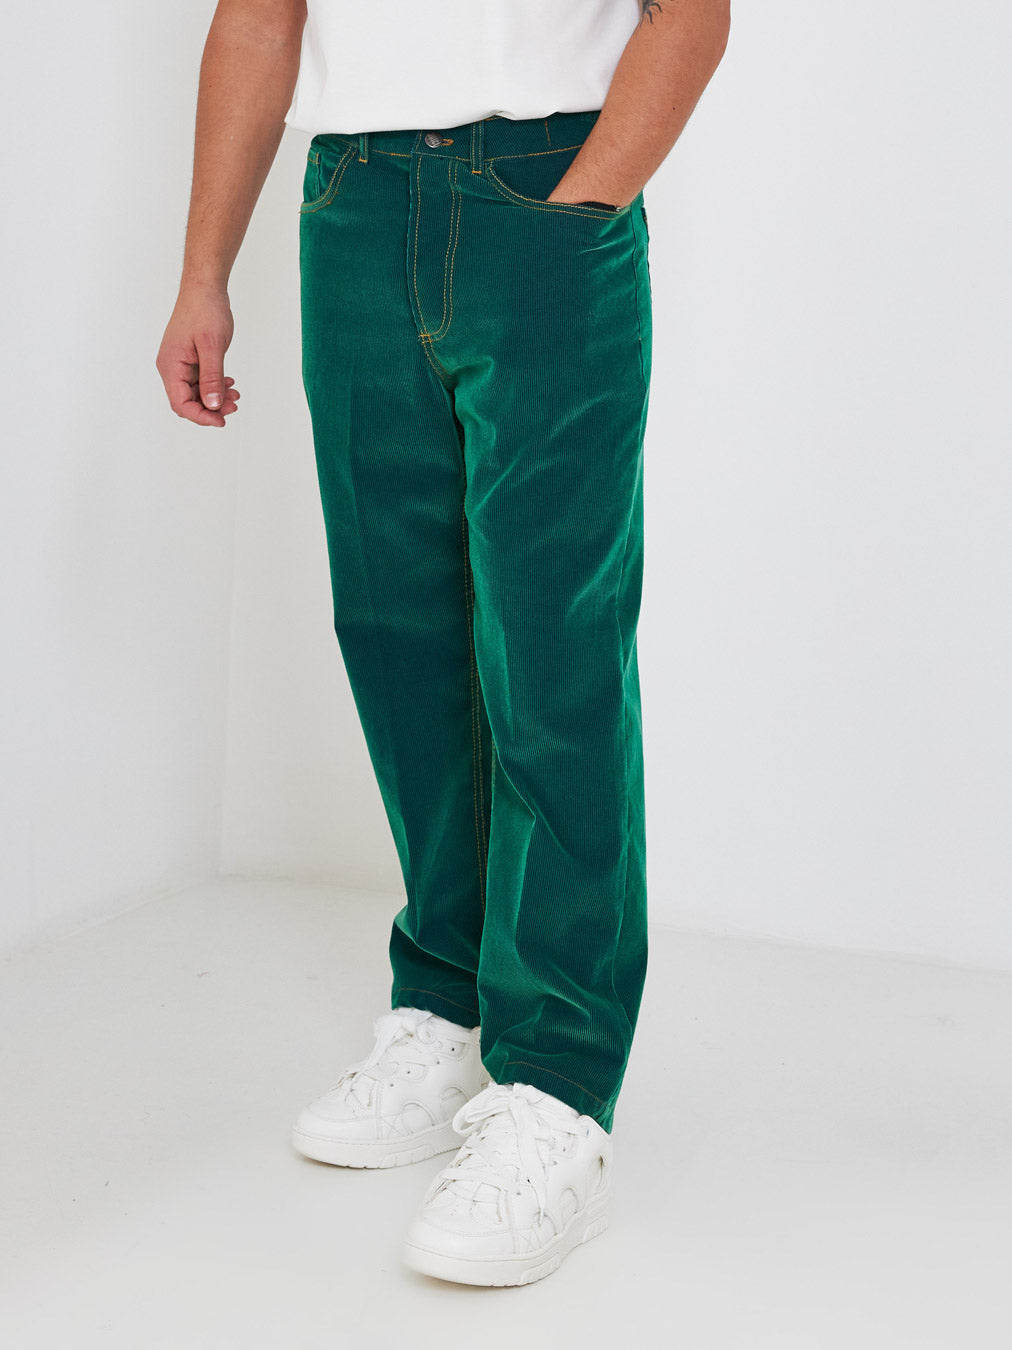 3Dici green ribbed trousers